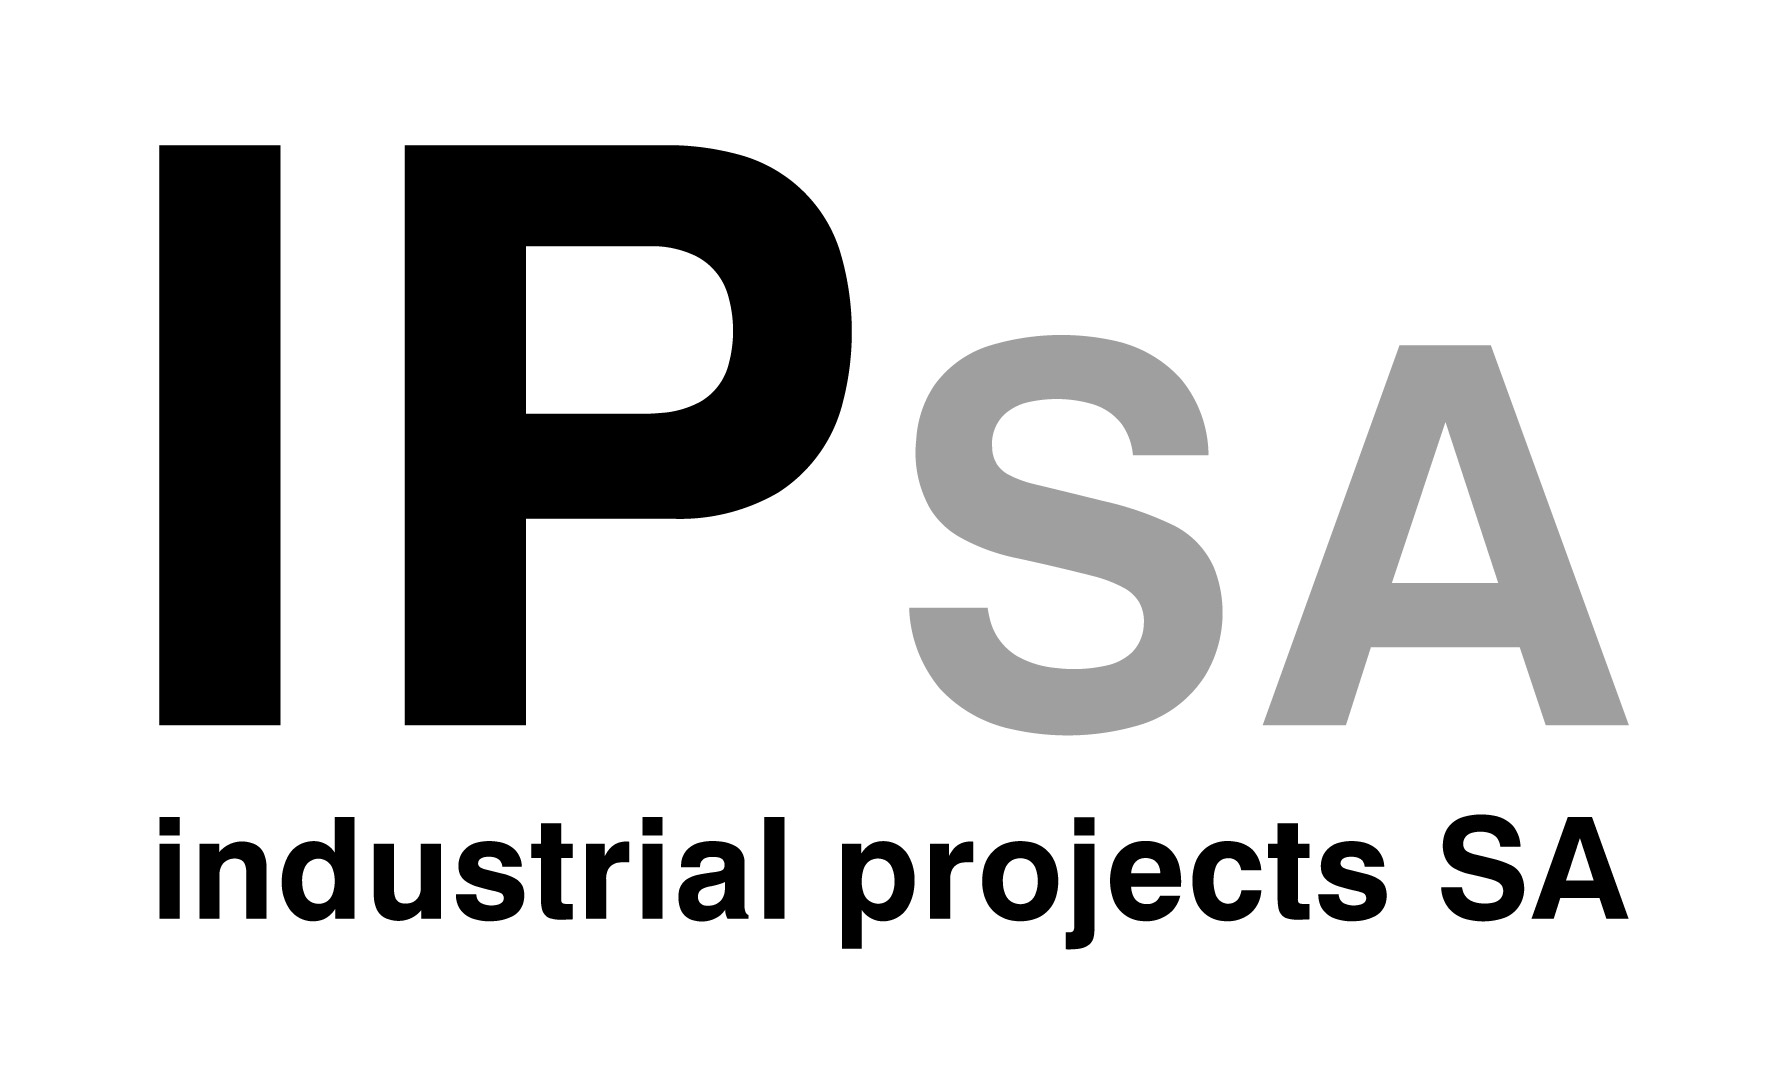 IP industrial projects S.A.